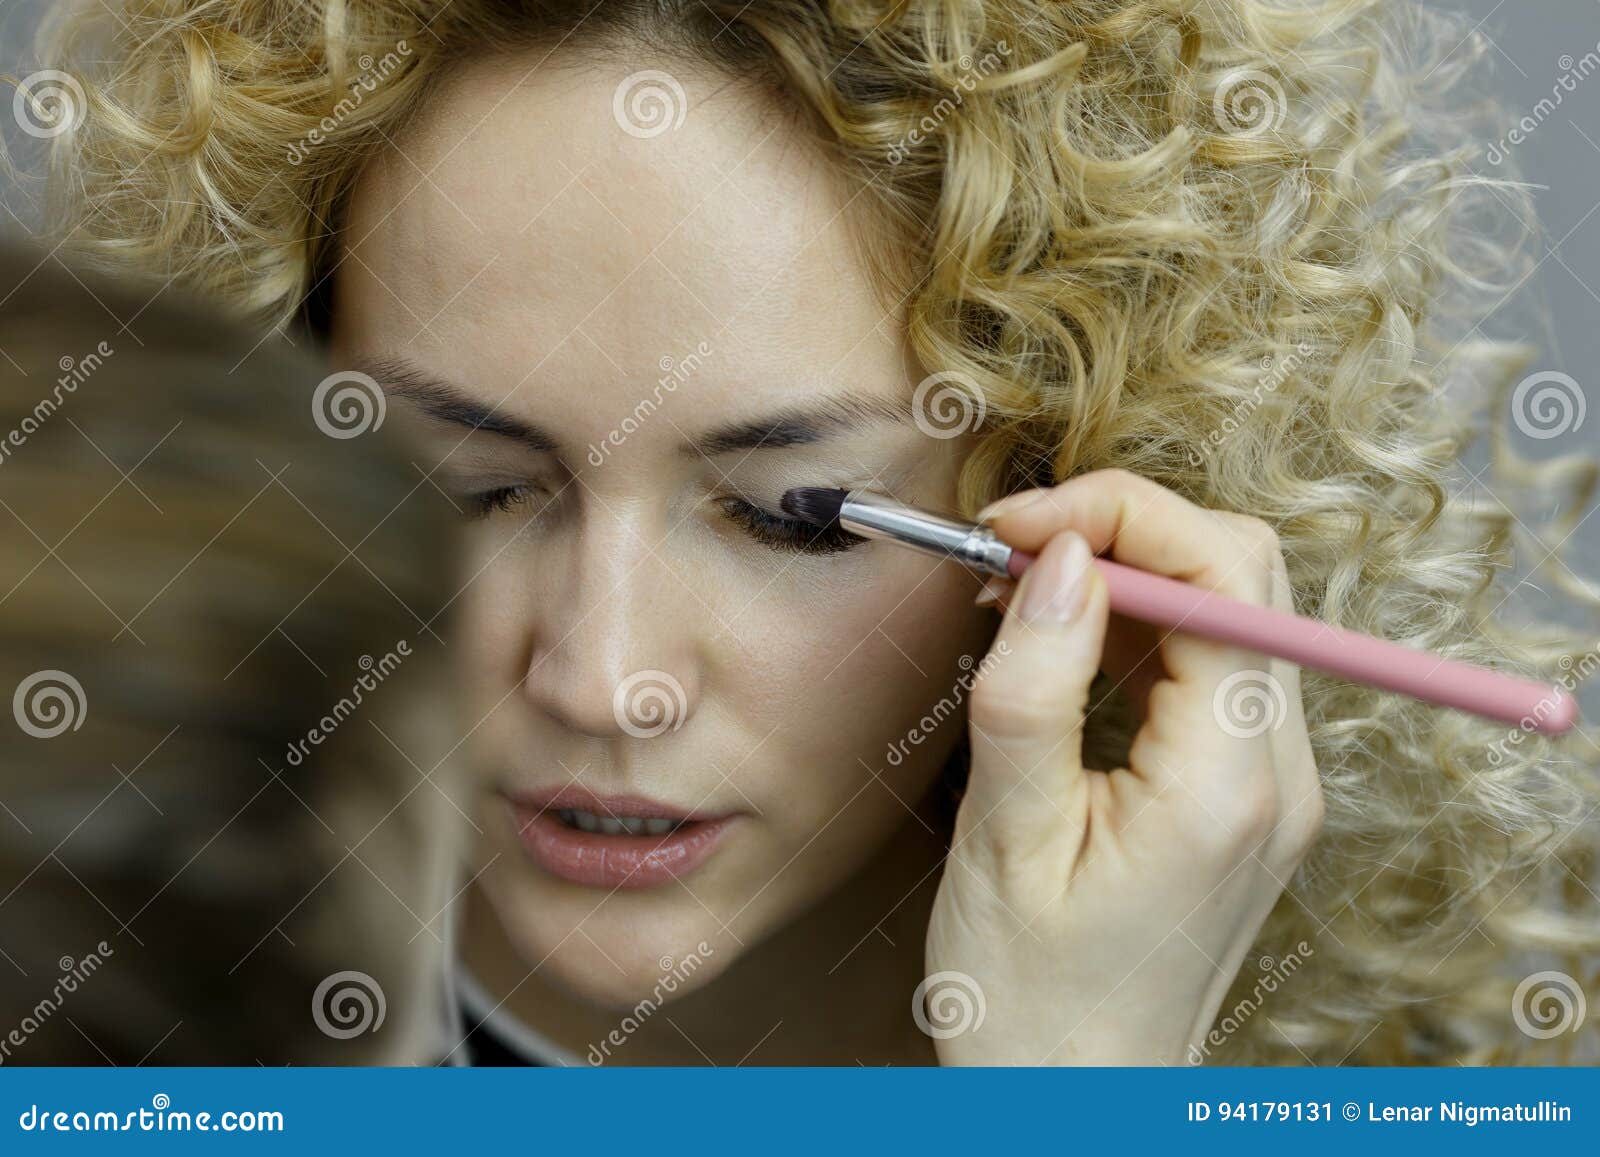 Make Up Artist Doing Professional Make Up Of Young Woman